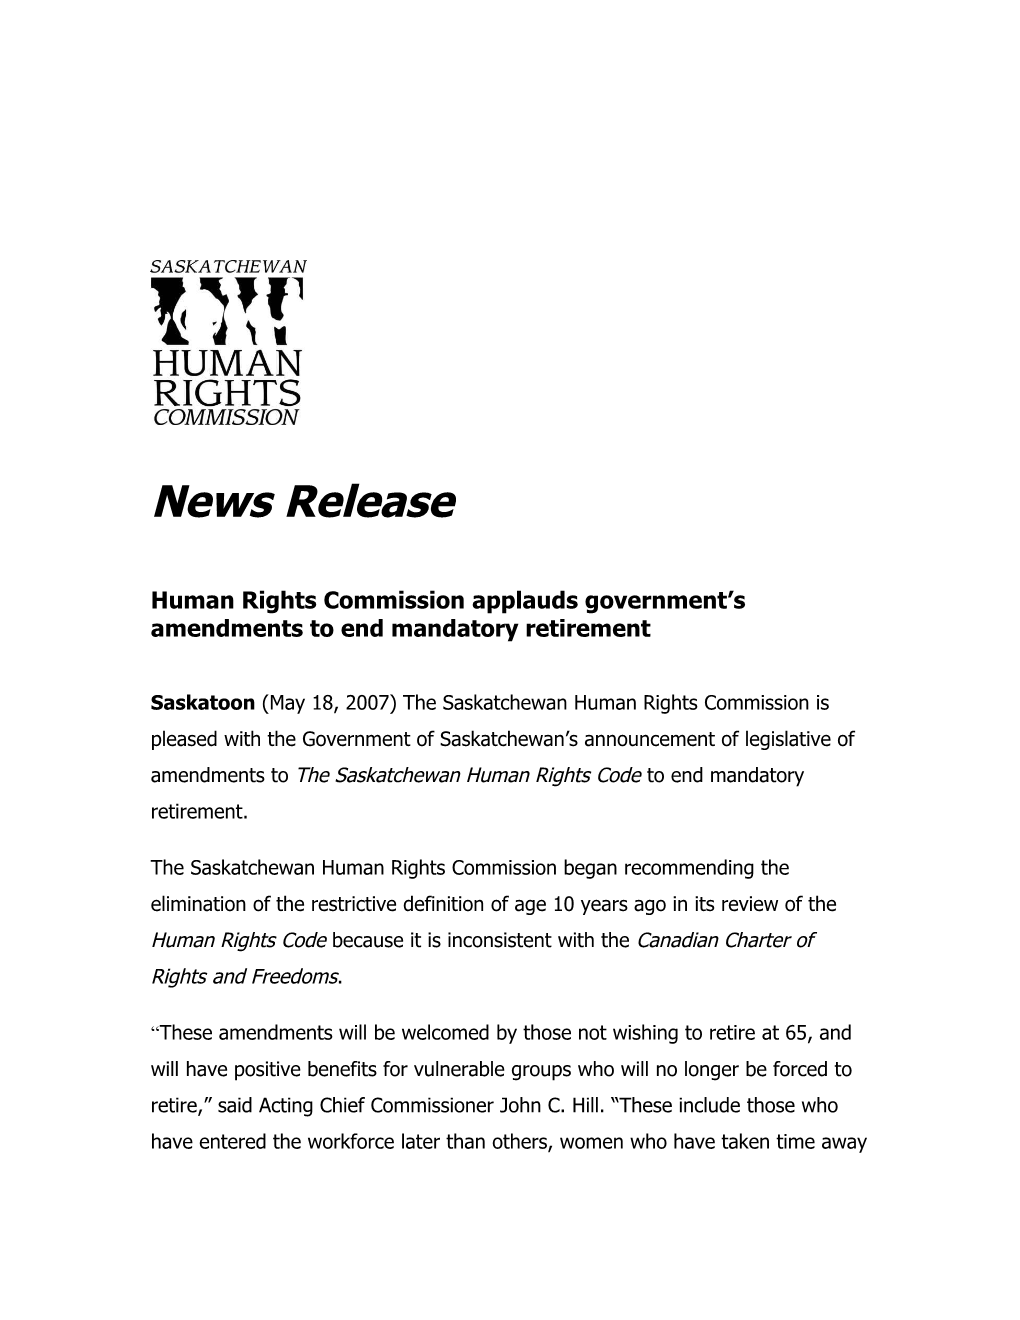 The Saskatchewan Human Rights Commission Is Disappointed by the Decision Reached by The s1